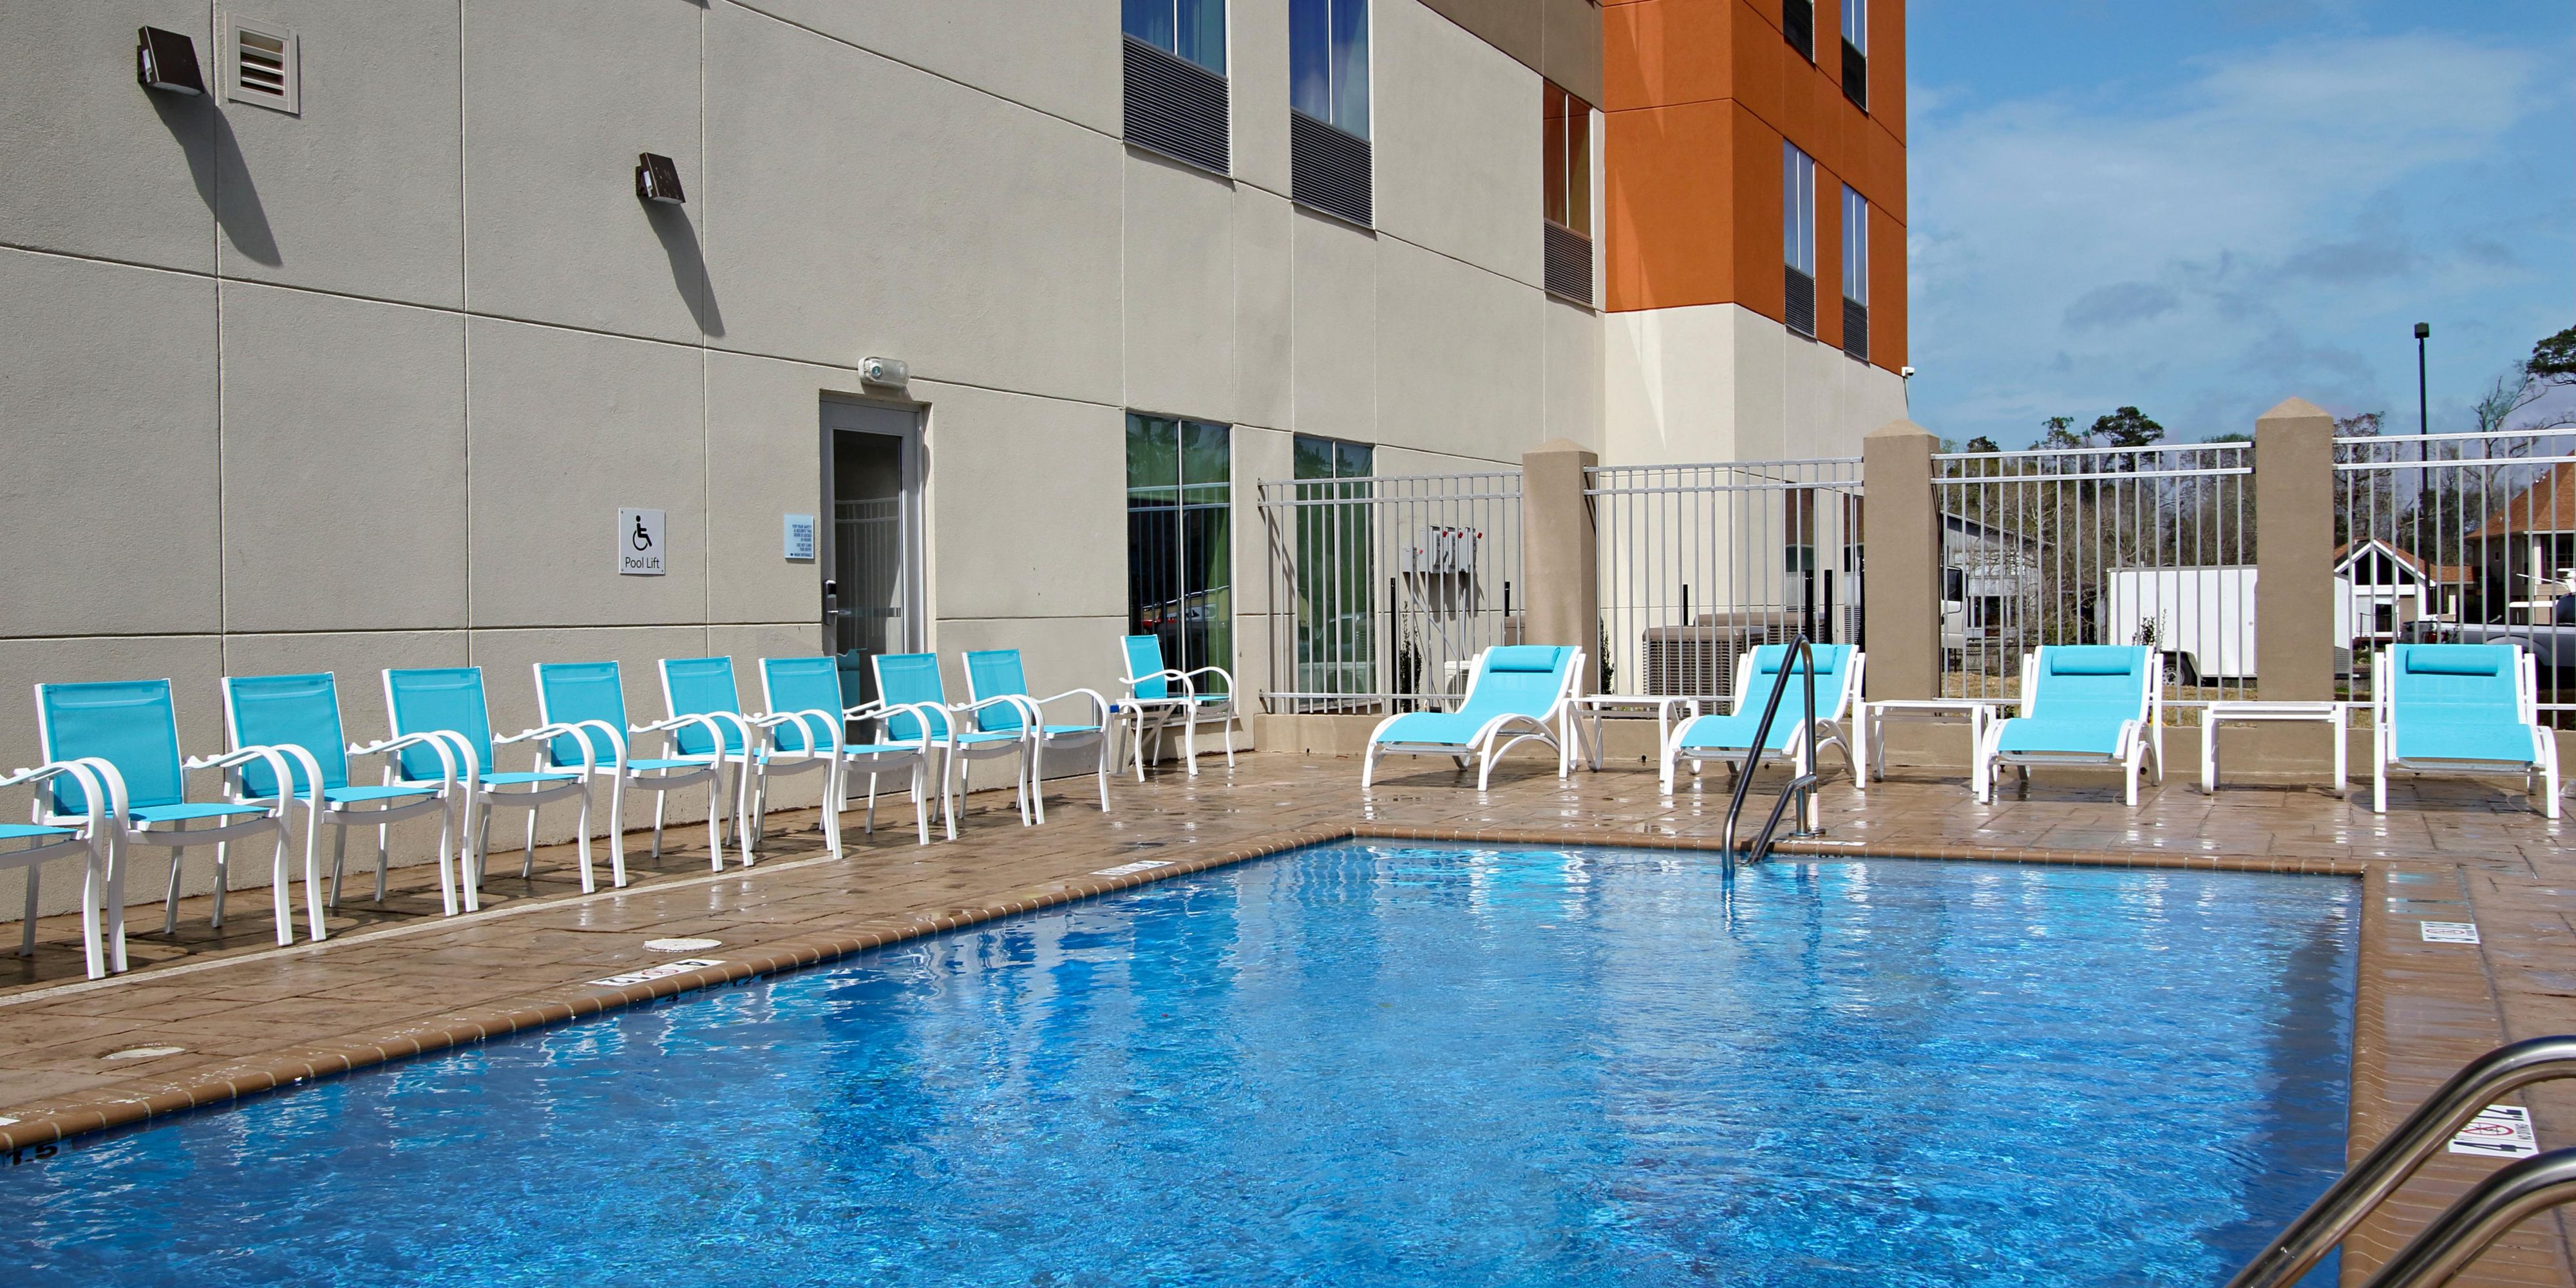 Be sure to take the time to enjoy our outdoor pool during your stay. What a great way to relax, have fun, or get some exercise while traveling!